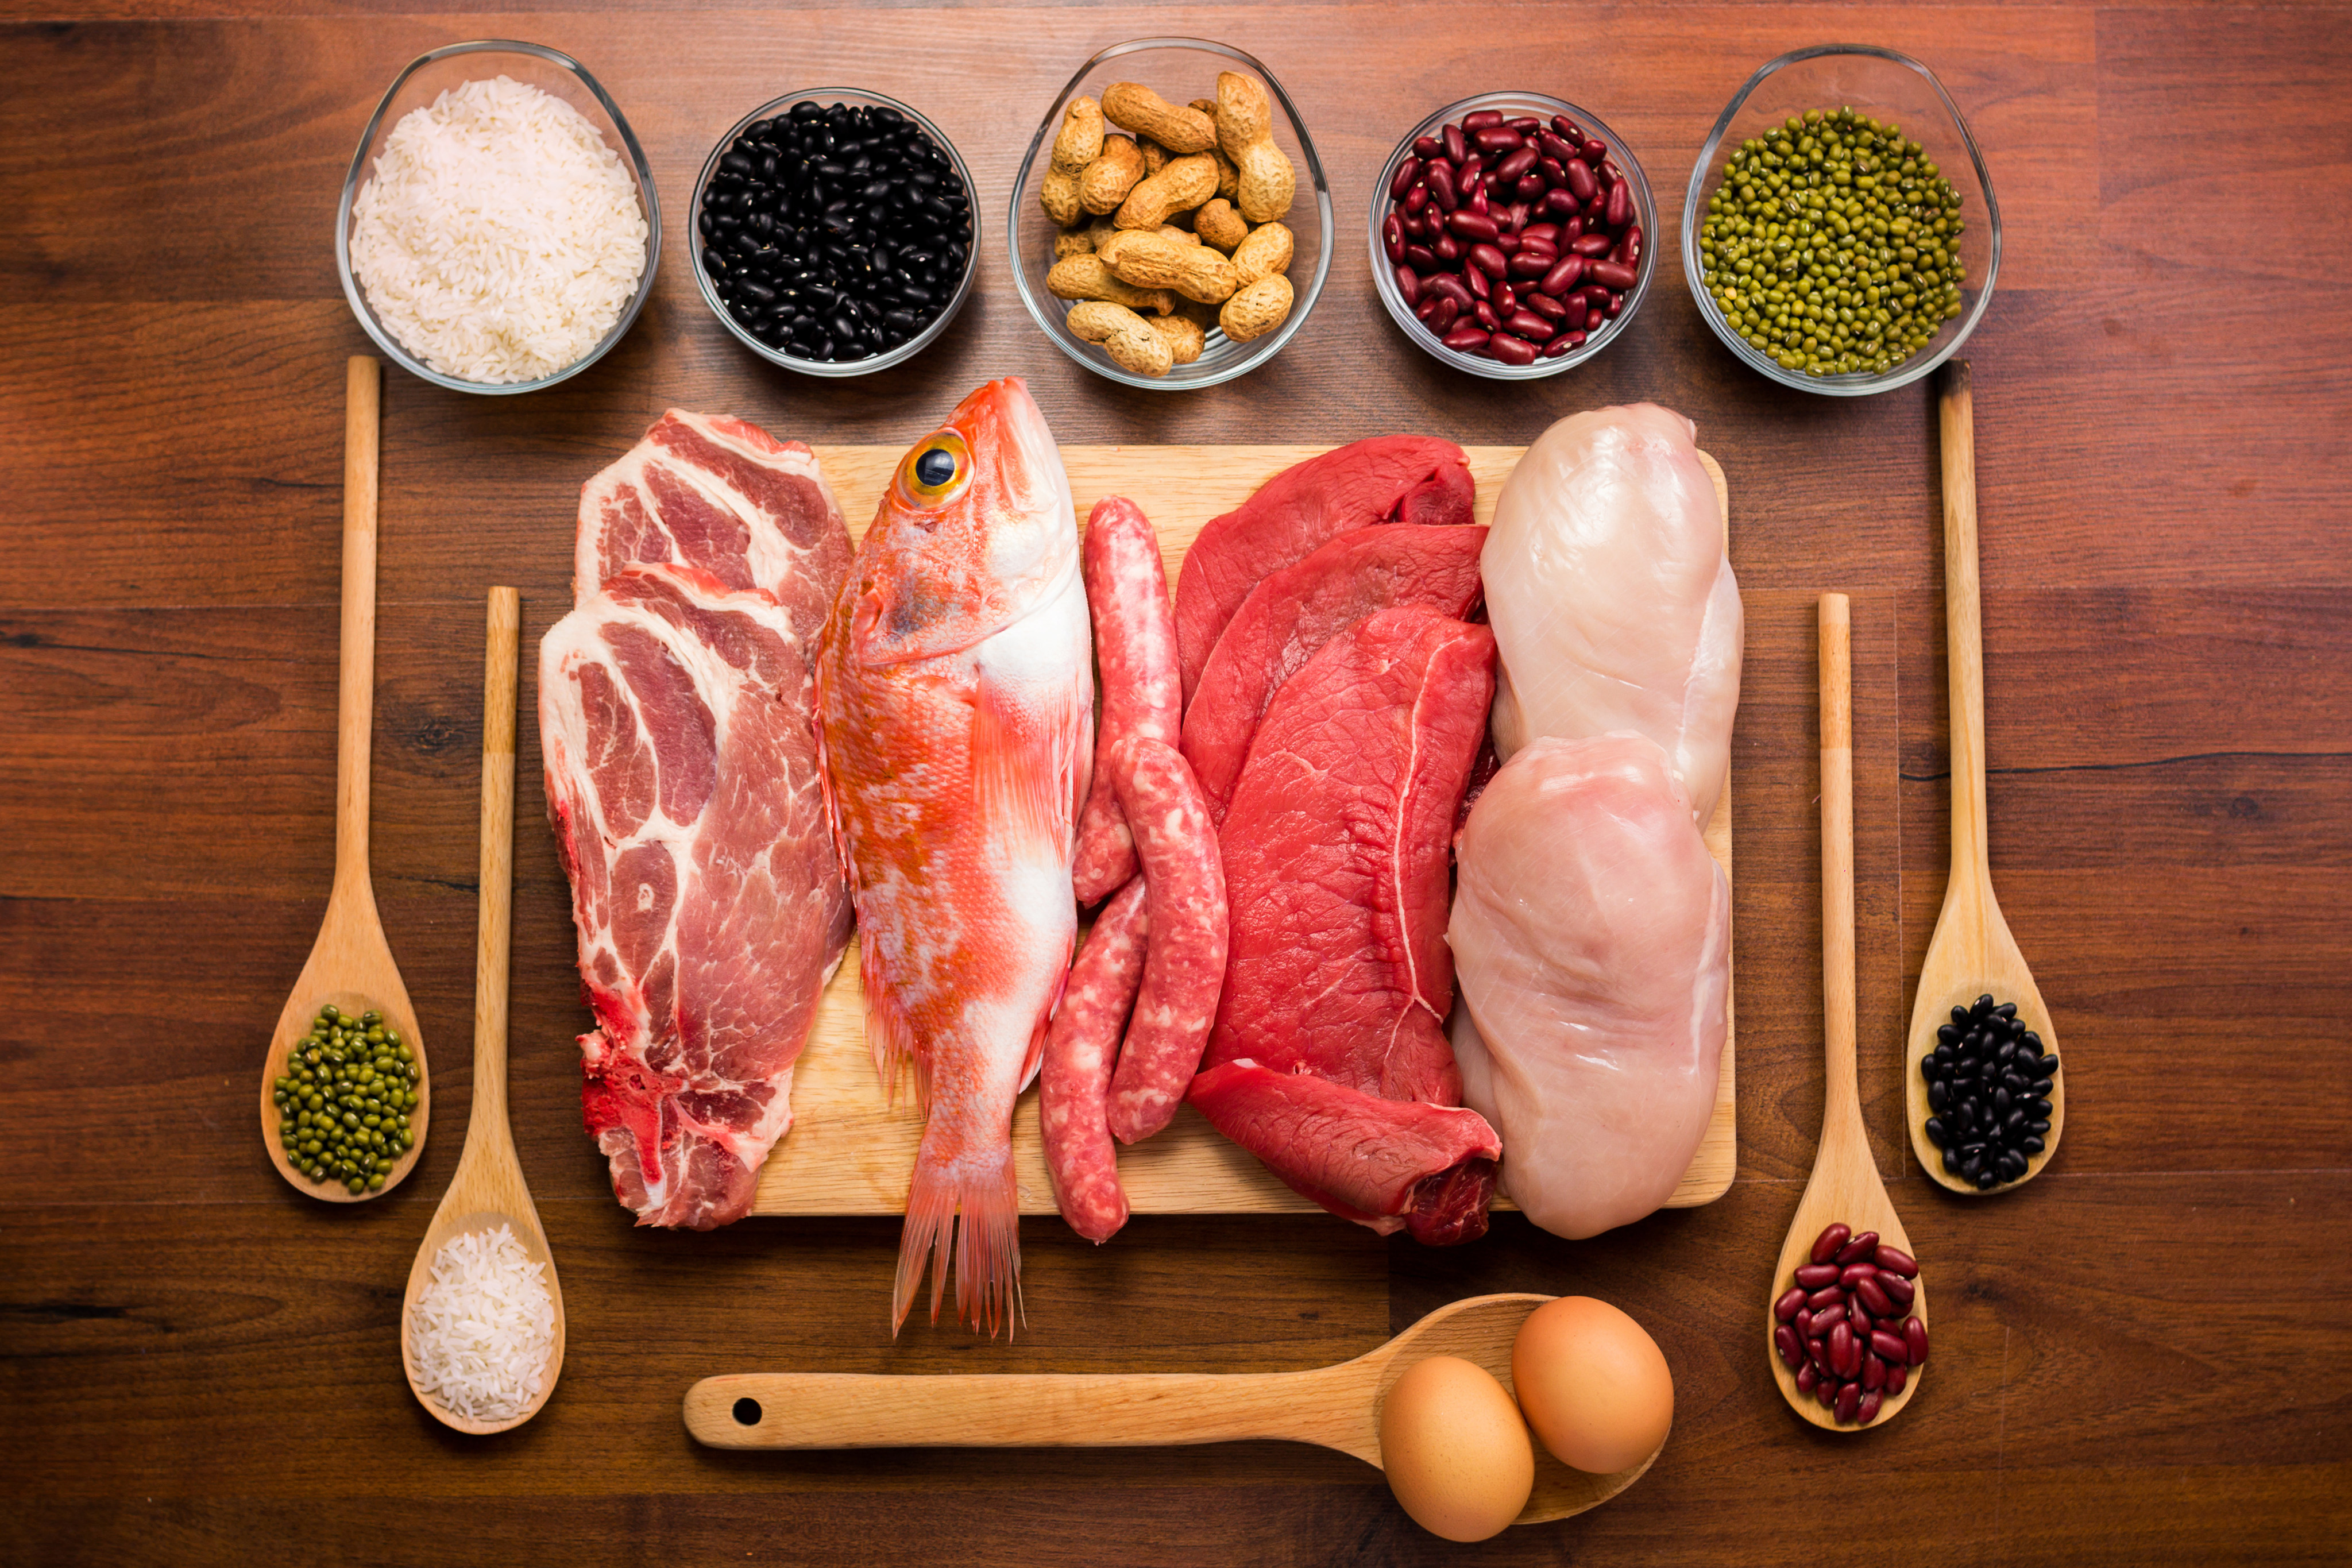 Protein can come from a variety of sources. Photo: Shutterstock